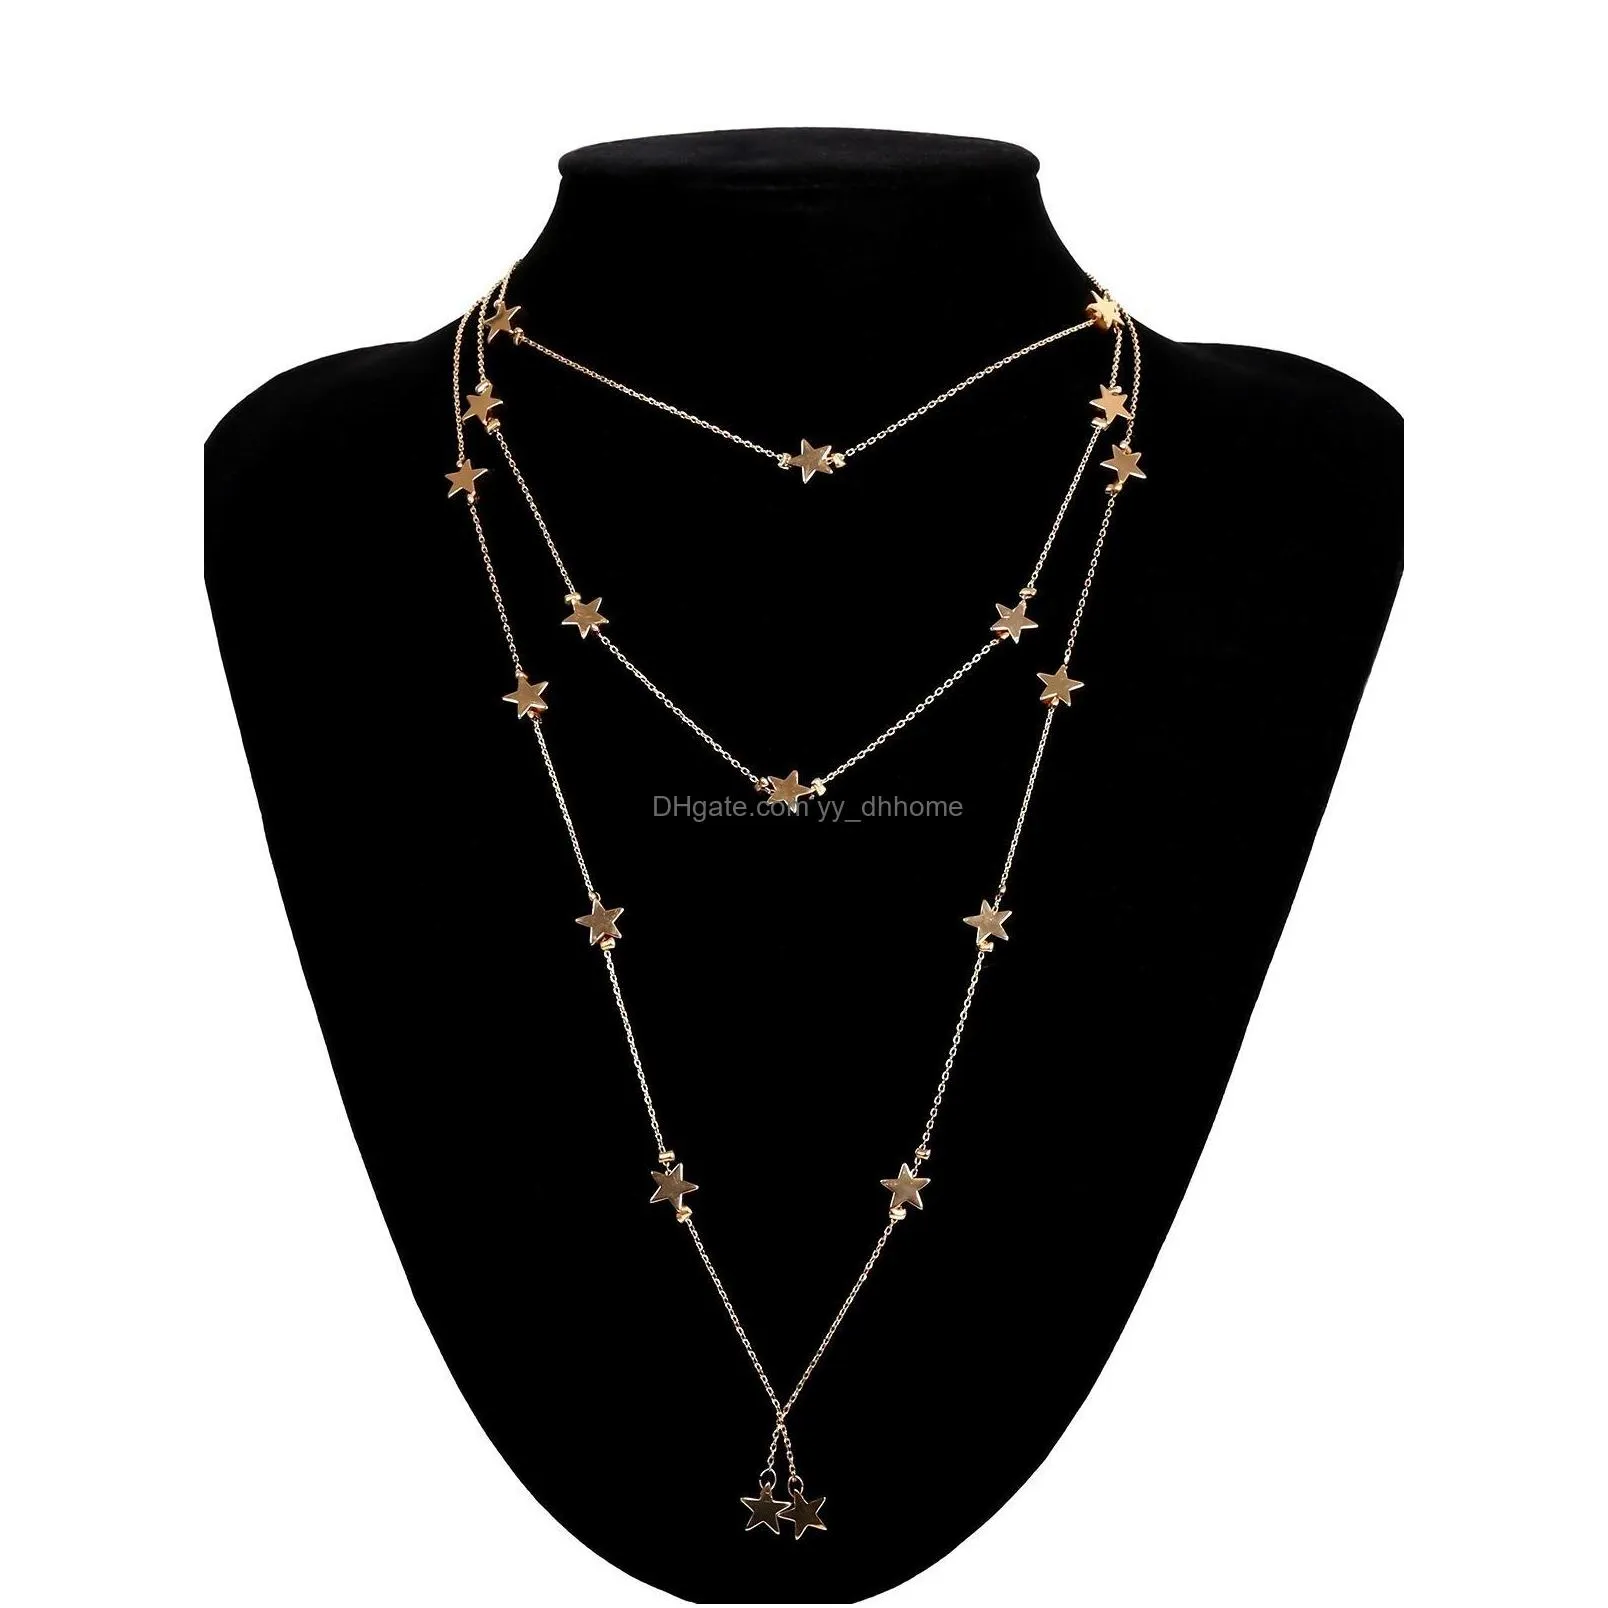 star individual character tide fashionable business collar is acted the role of star pendant tassel multilayer necklace